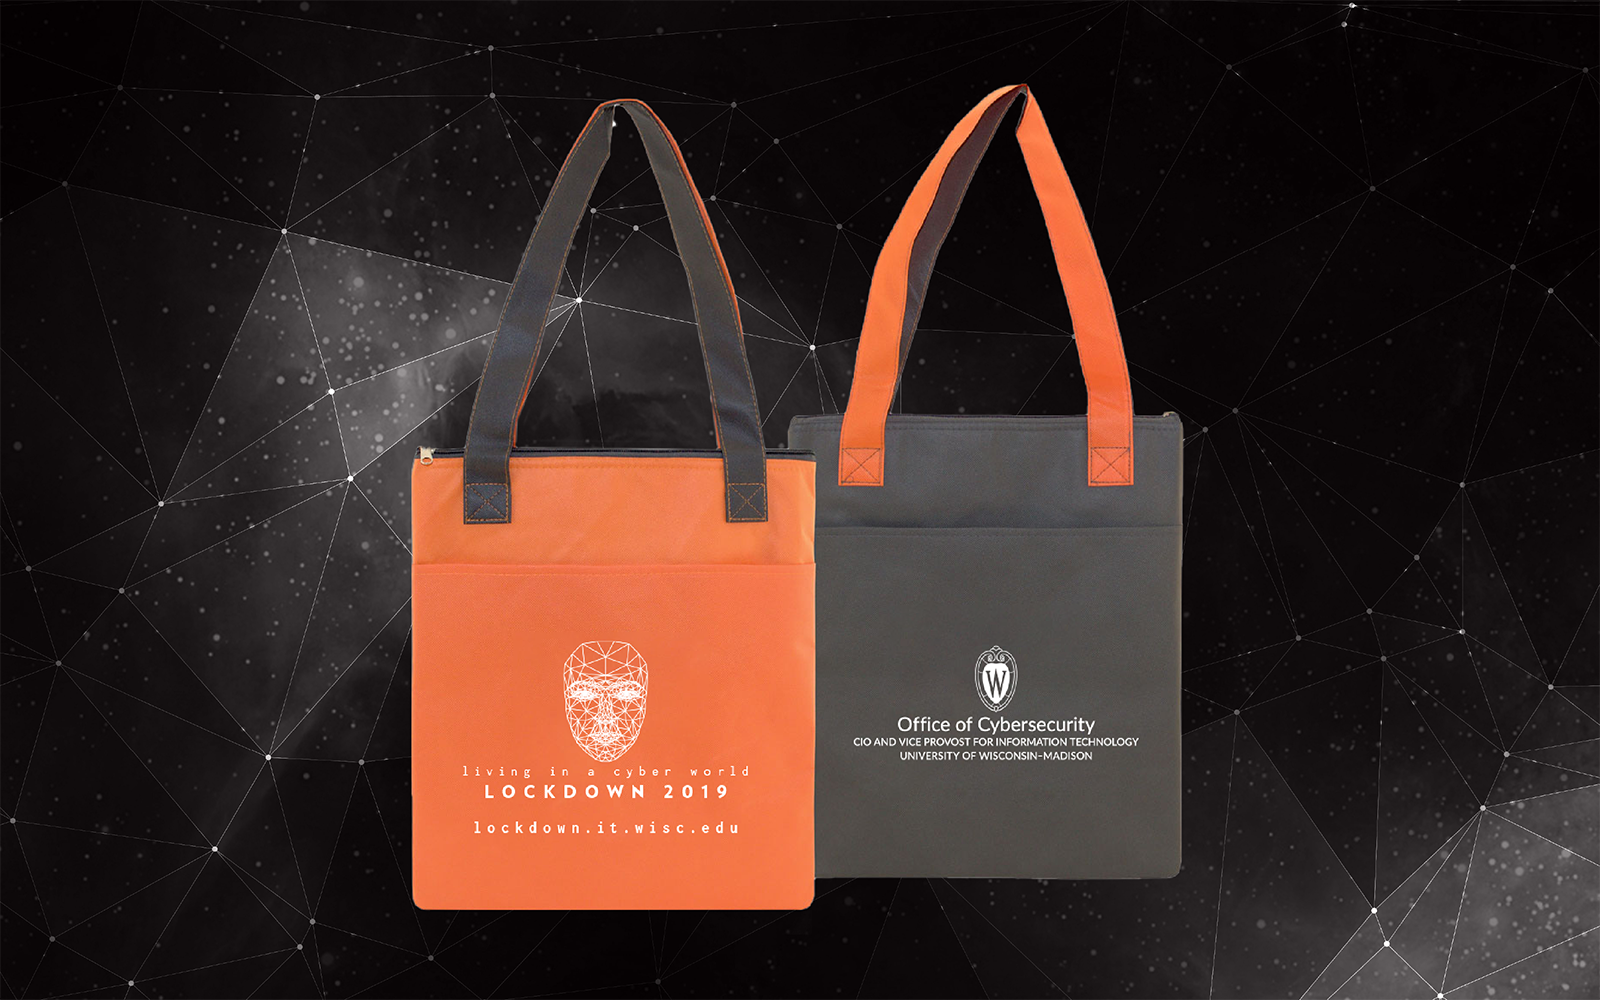 Lockdown logo on an orange and gray tote